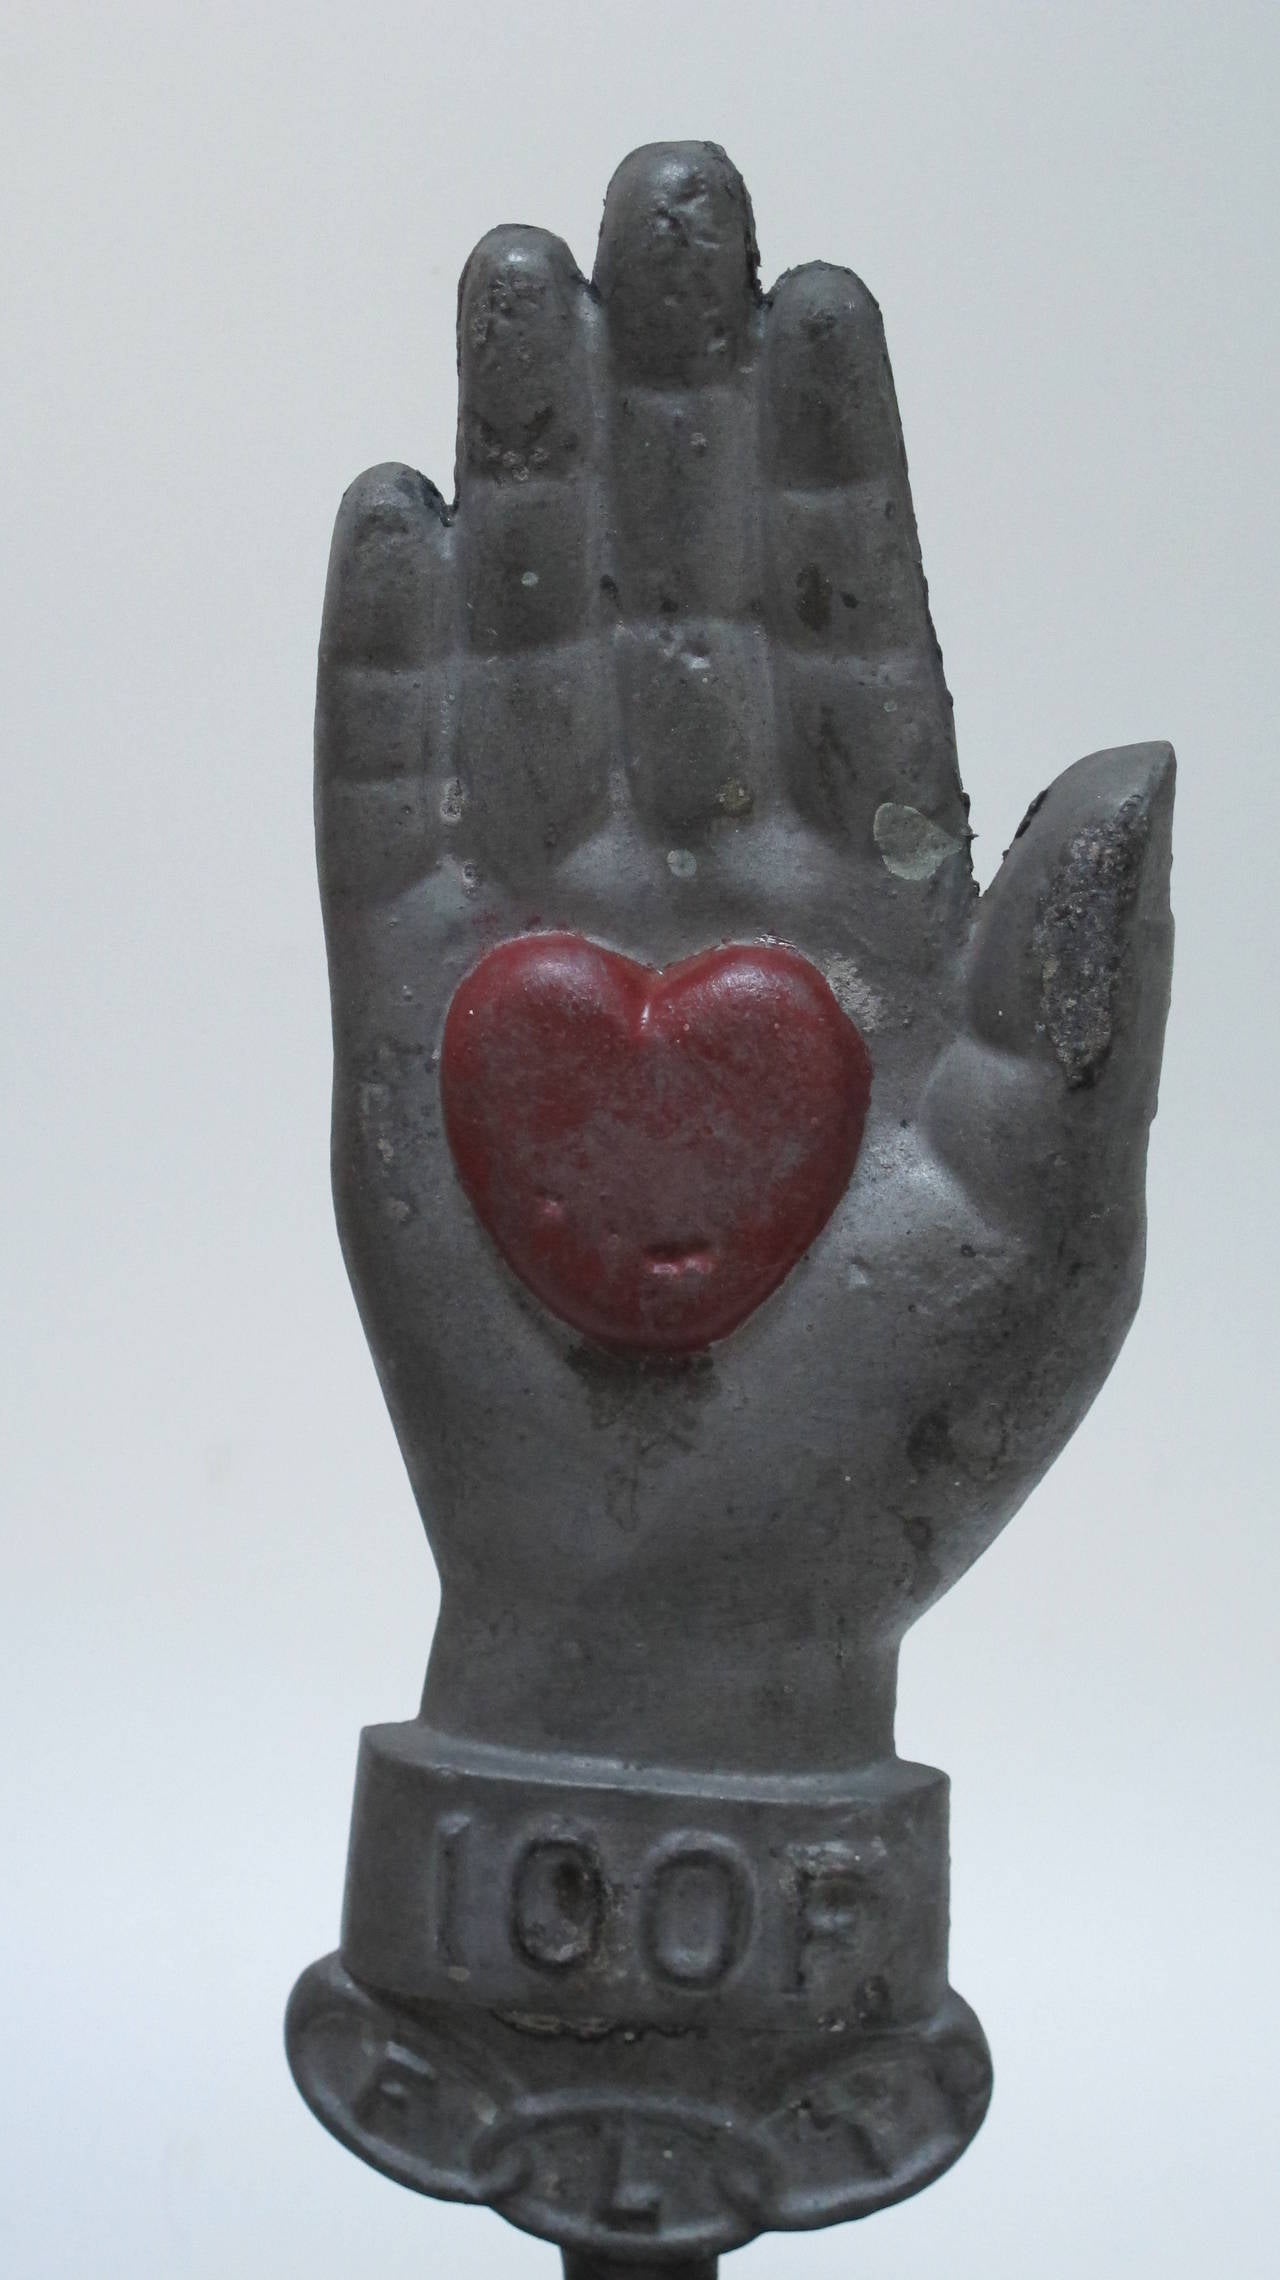 Painted Iron Heart in Hand Sculpture 1